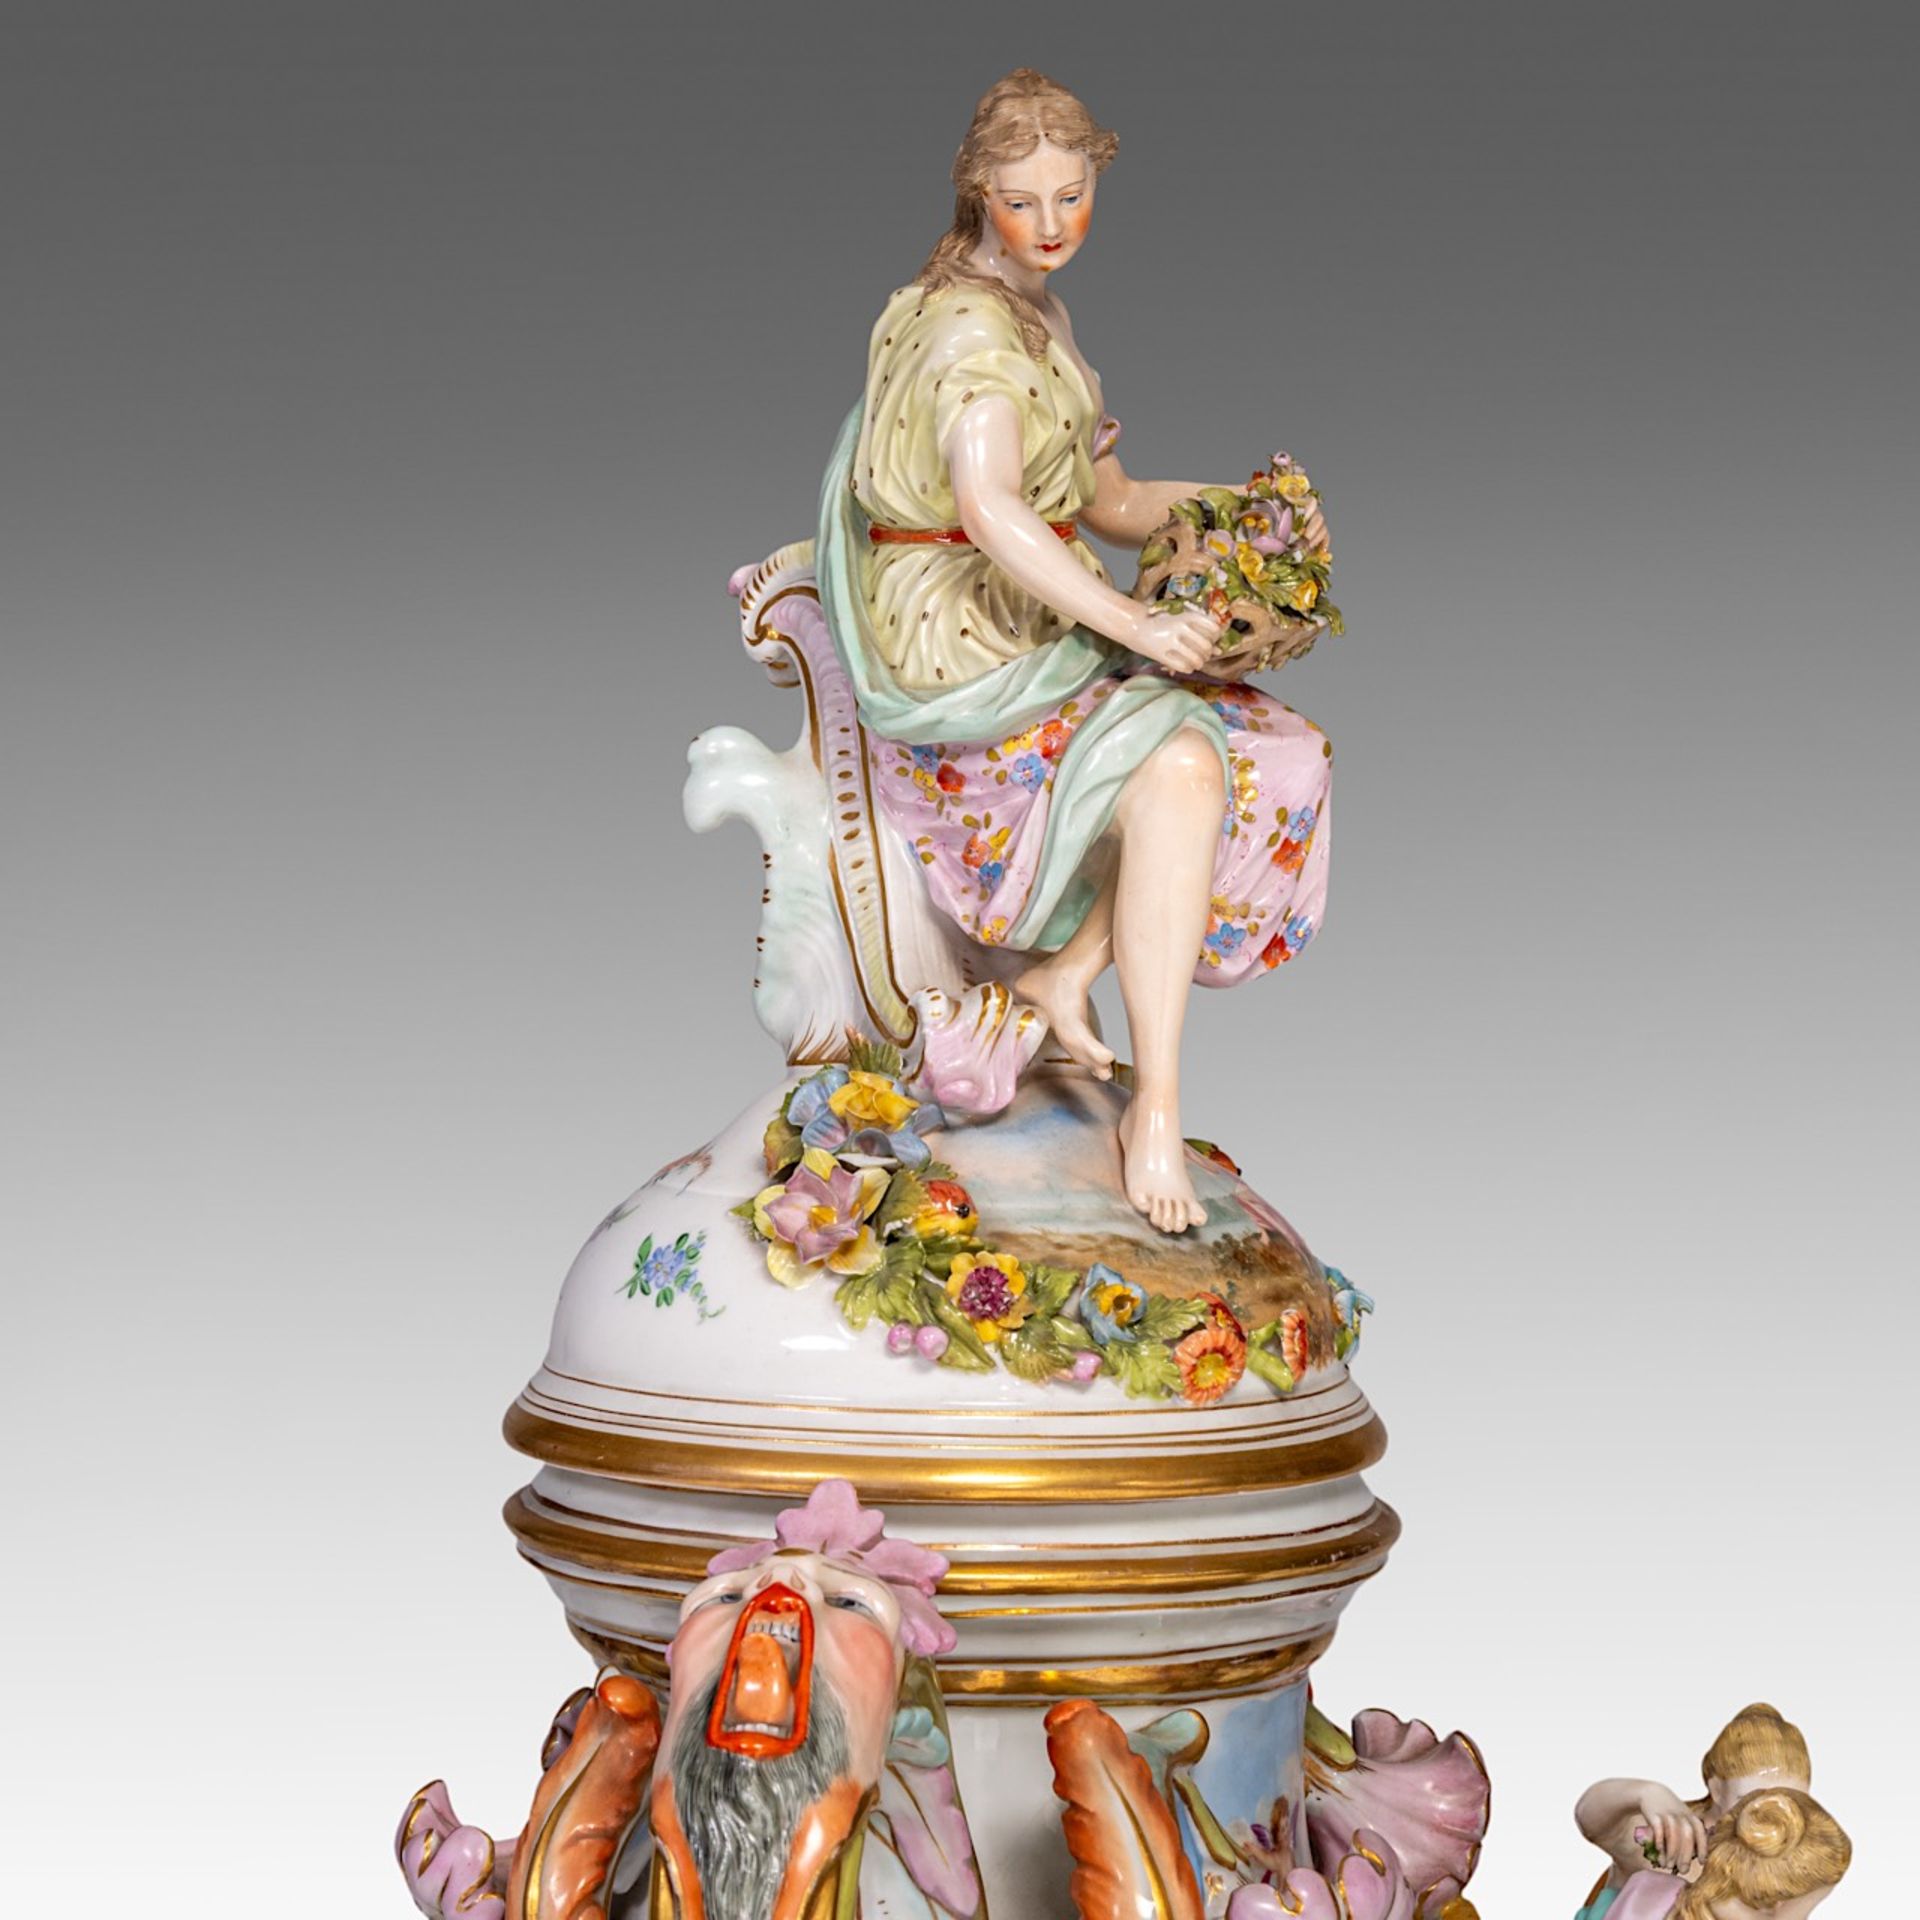 A very imposing Saxony porcelain vase on stand, Postschappel manufactory, Dresden, H 107 cm (total) - Image 20 of 23